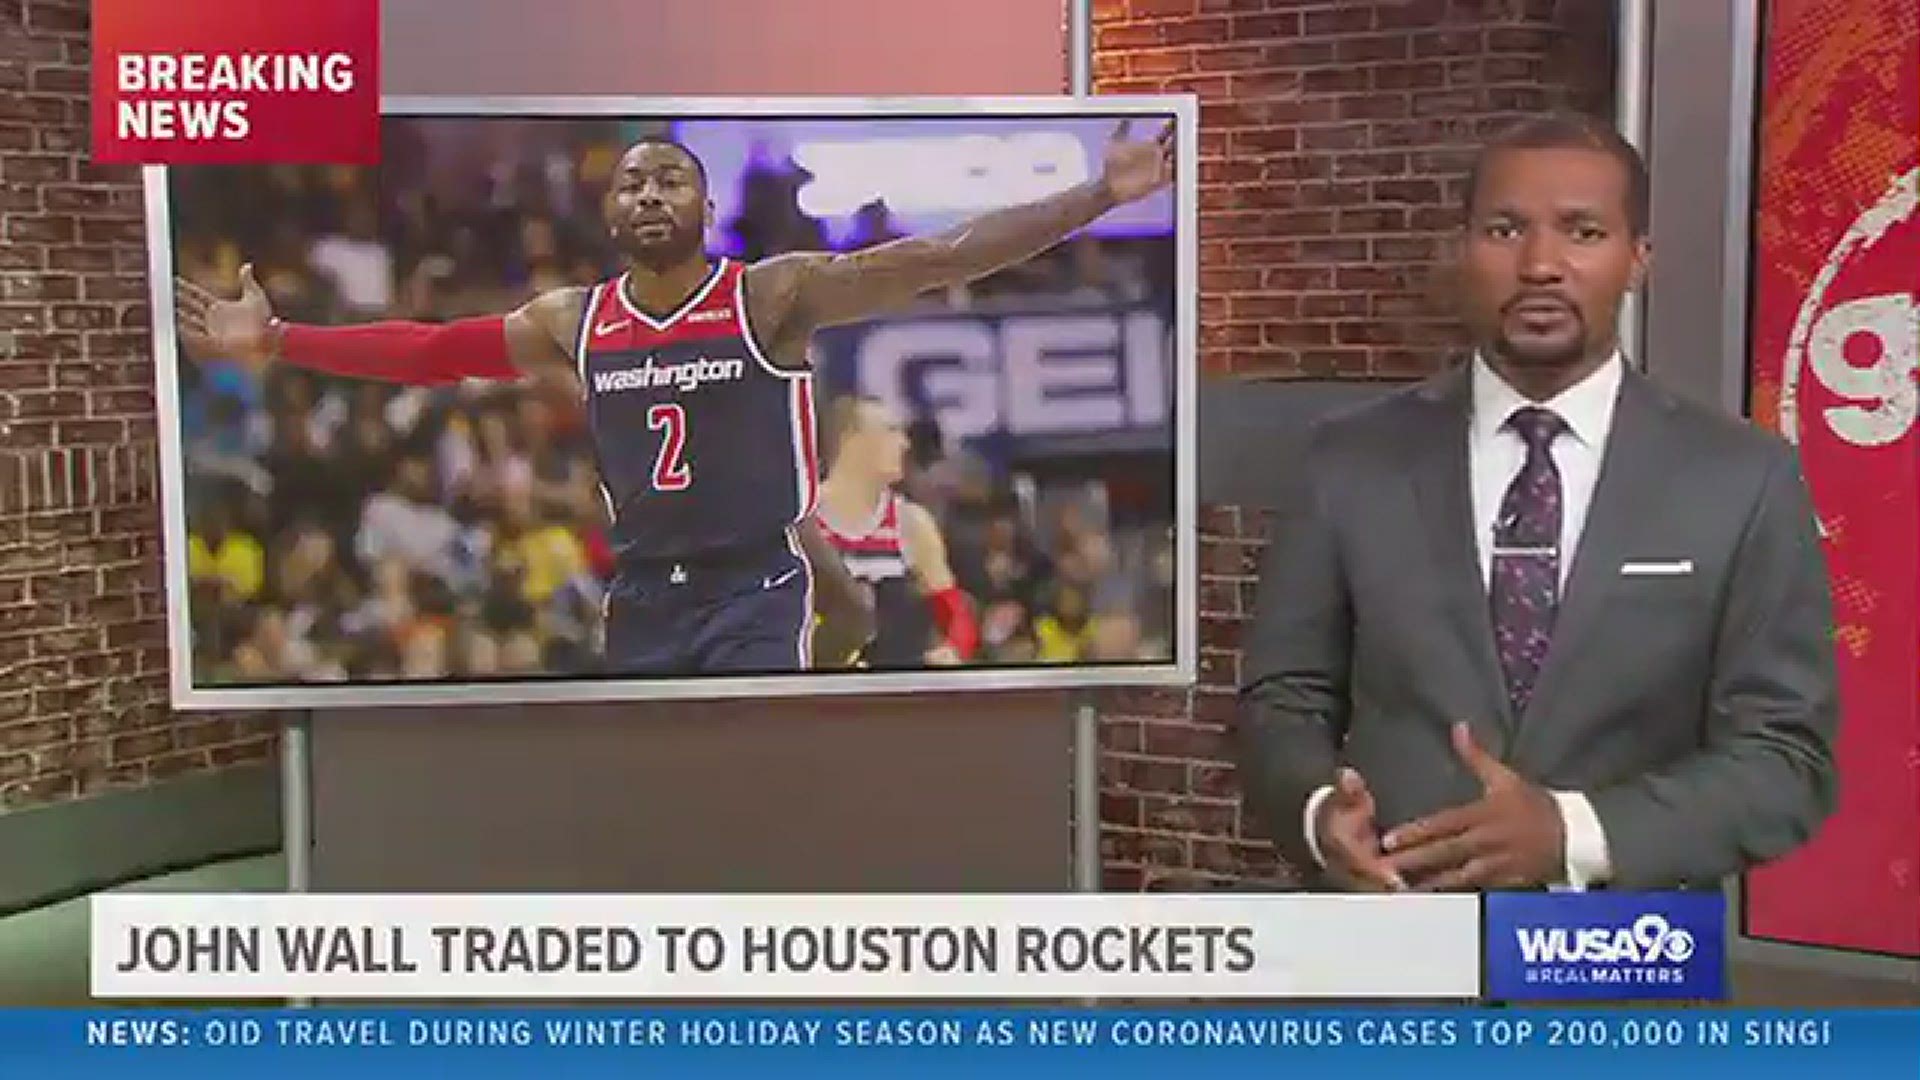 Houston Rockets agree to trade Russell Westbrook to Washington for John Wall and a first-round draft pick.